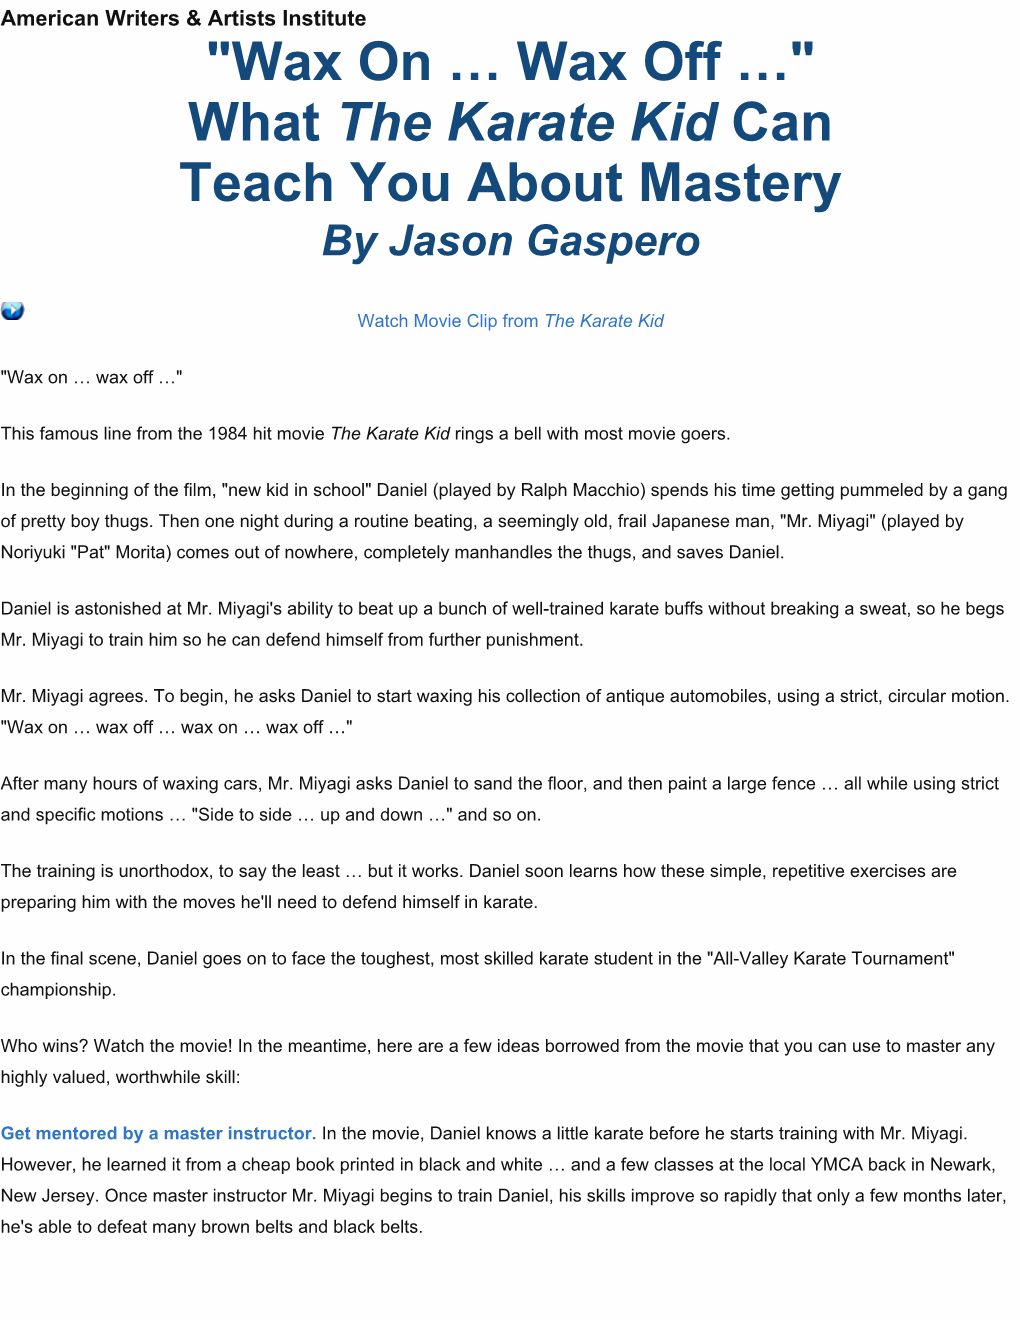 What the Karate Kid Can Teach You About Mastery by Jason Gaspero